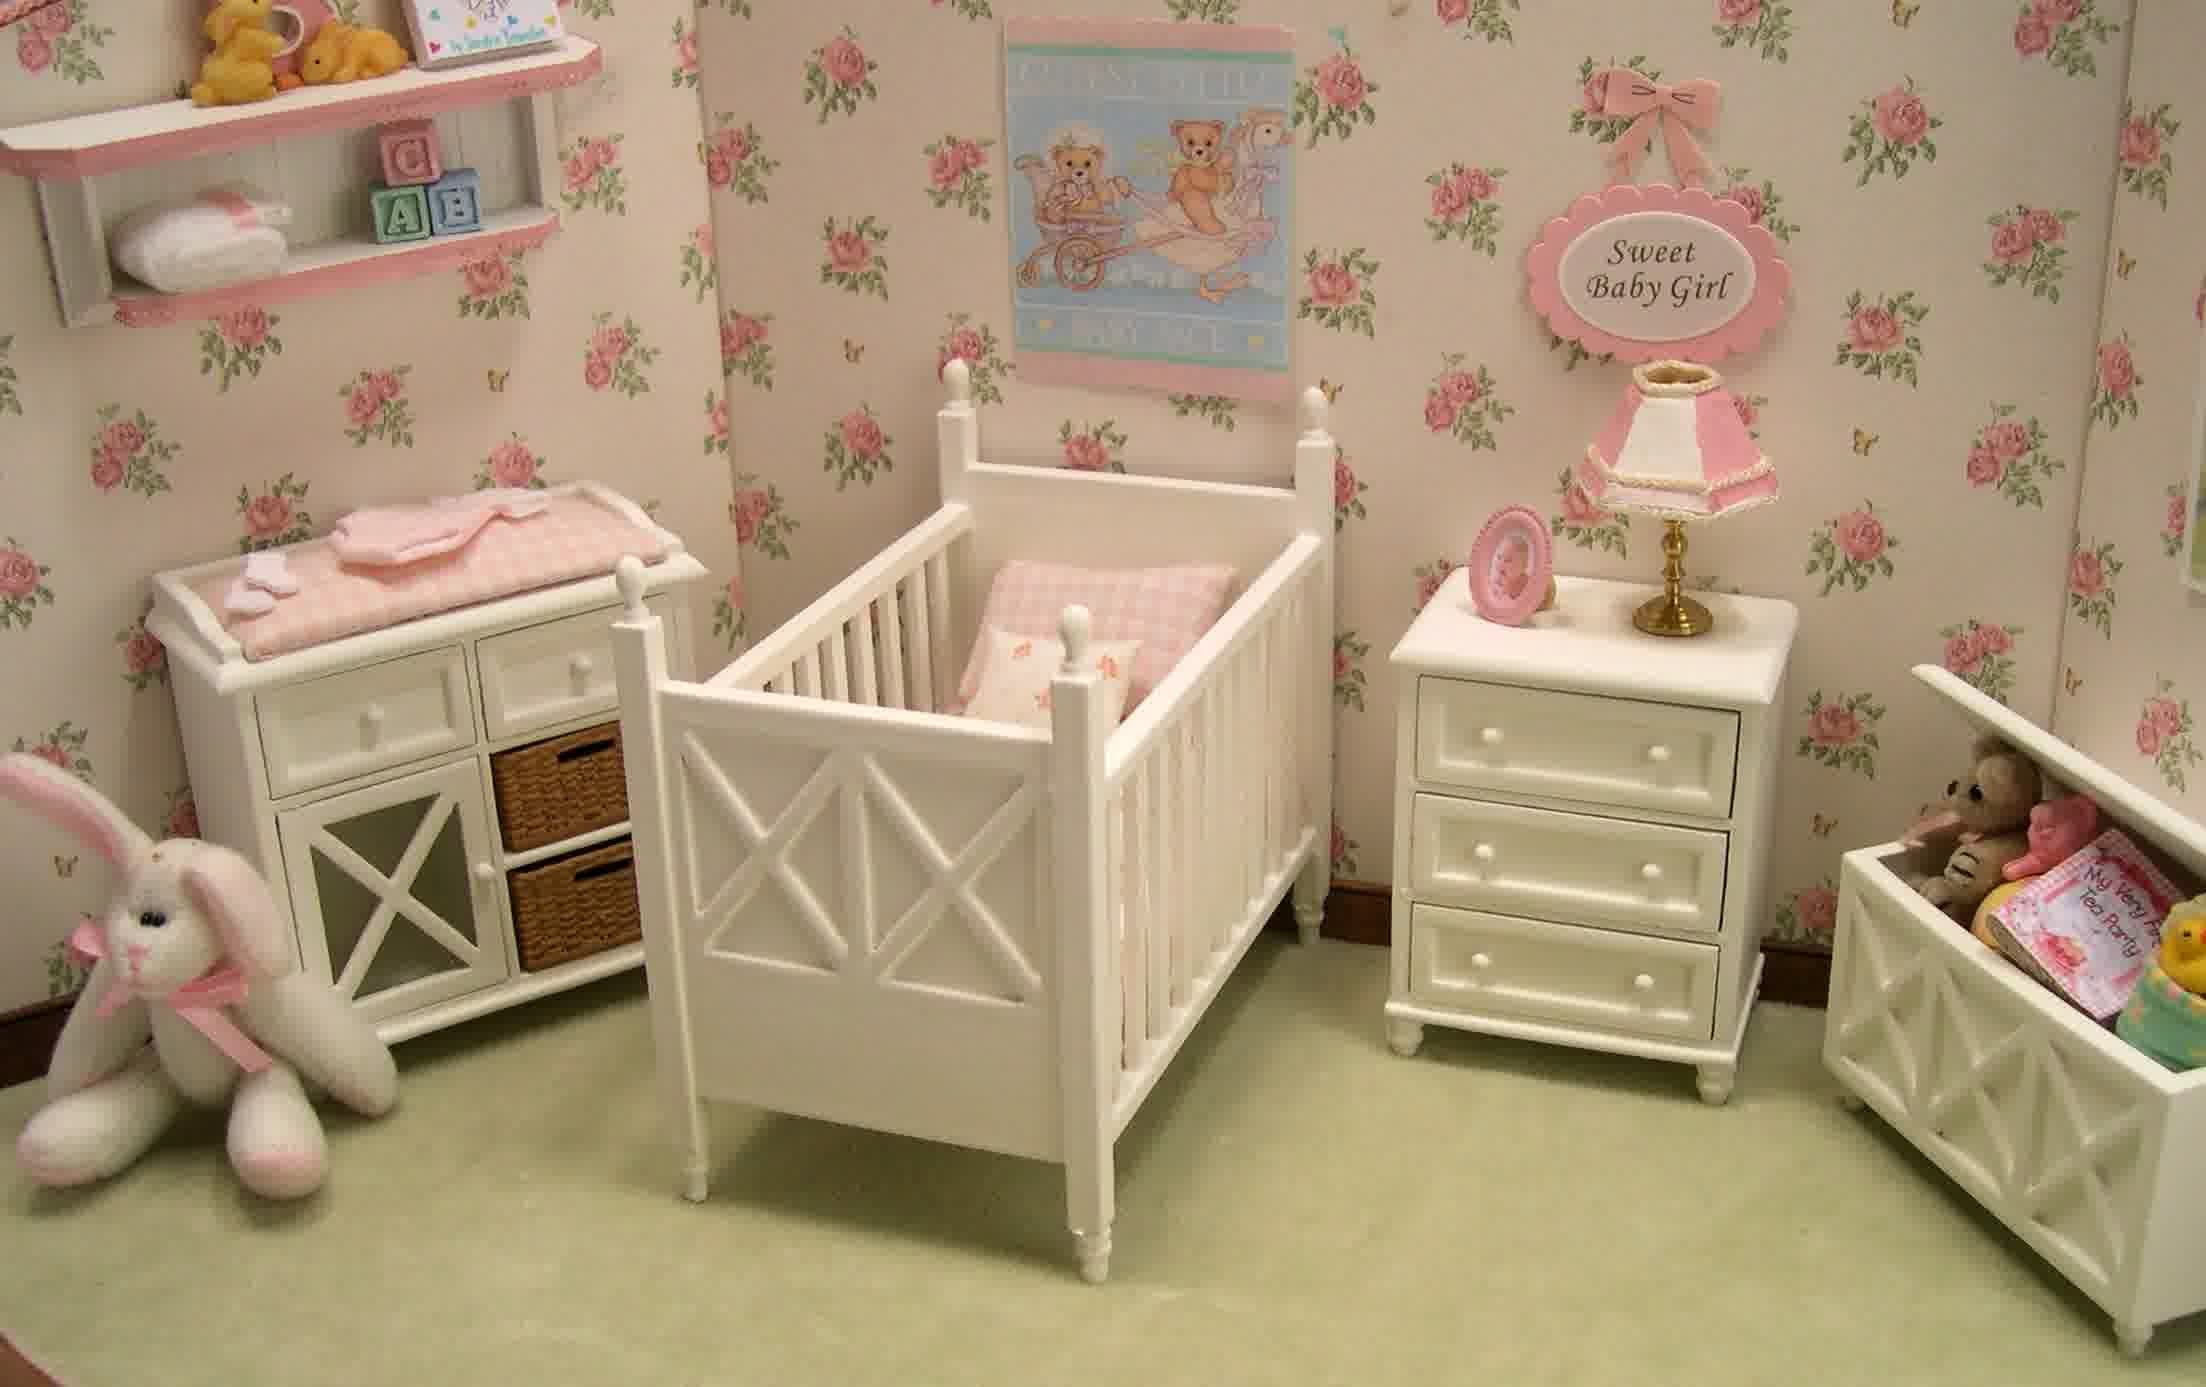 2206x1387 Baby Furniture For Small Bedrooms Bedroom Furniture Teen Boy Baby Girls Room  Decor Cool Design Inspiration